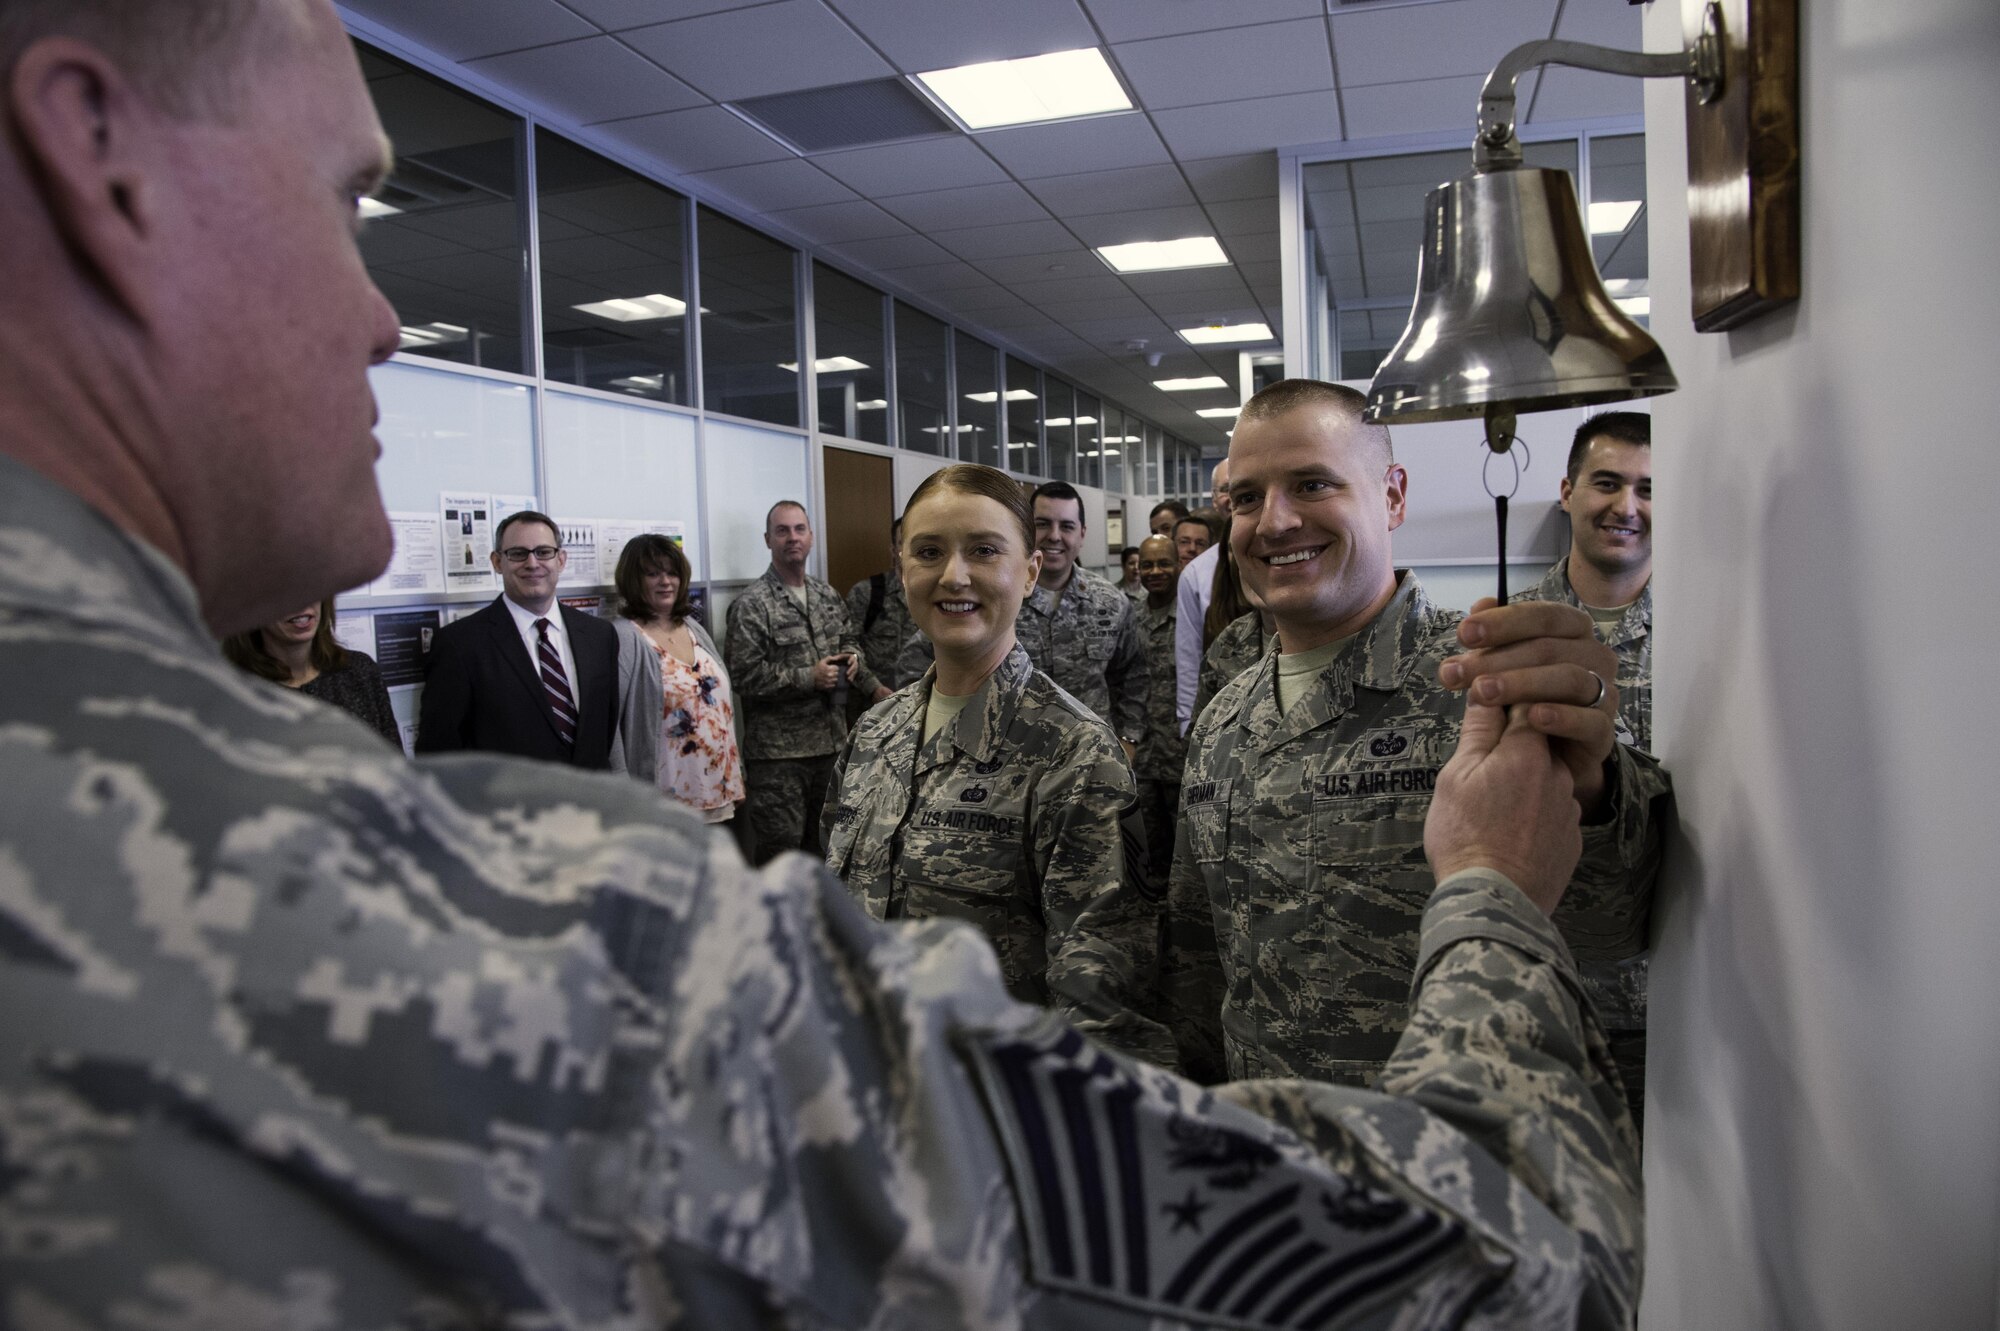 Chief Master Sgt. of the Air Force James Cody rings the victory bell with Airmen from the Air Force Legal Operations Agency March 23, 2015, during his visit to Joint Base Andrews, Md. The bell is rang when there is a legal victory in the office. (U.S. Air Force photo/Airman 1st Class Philip Bryant)